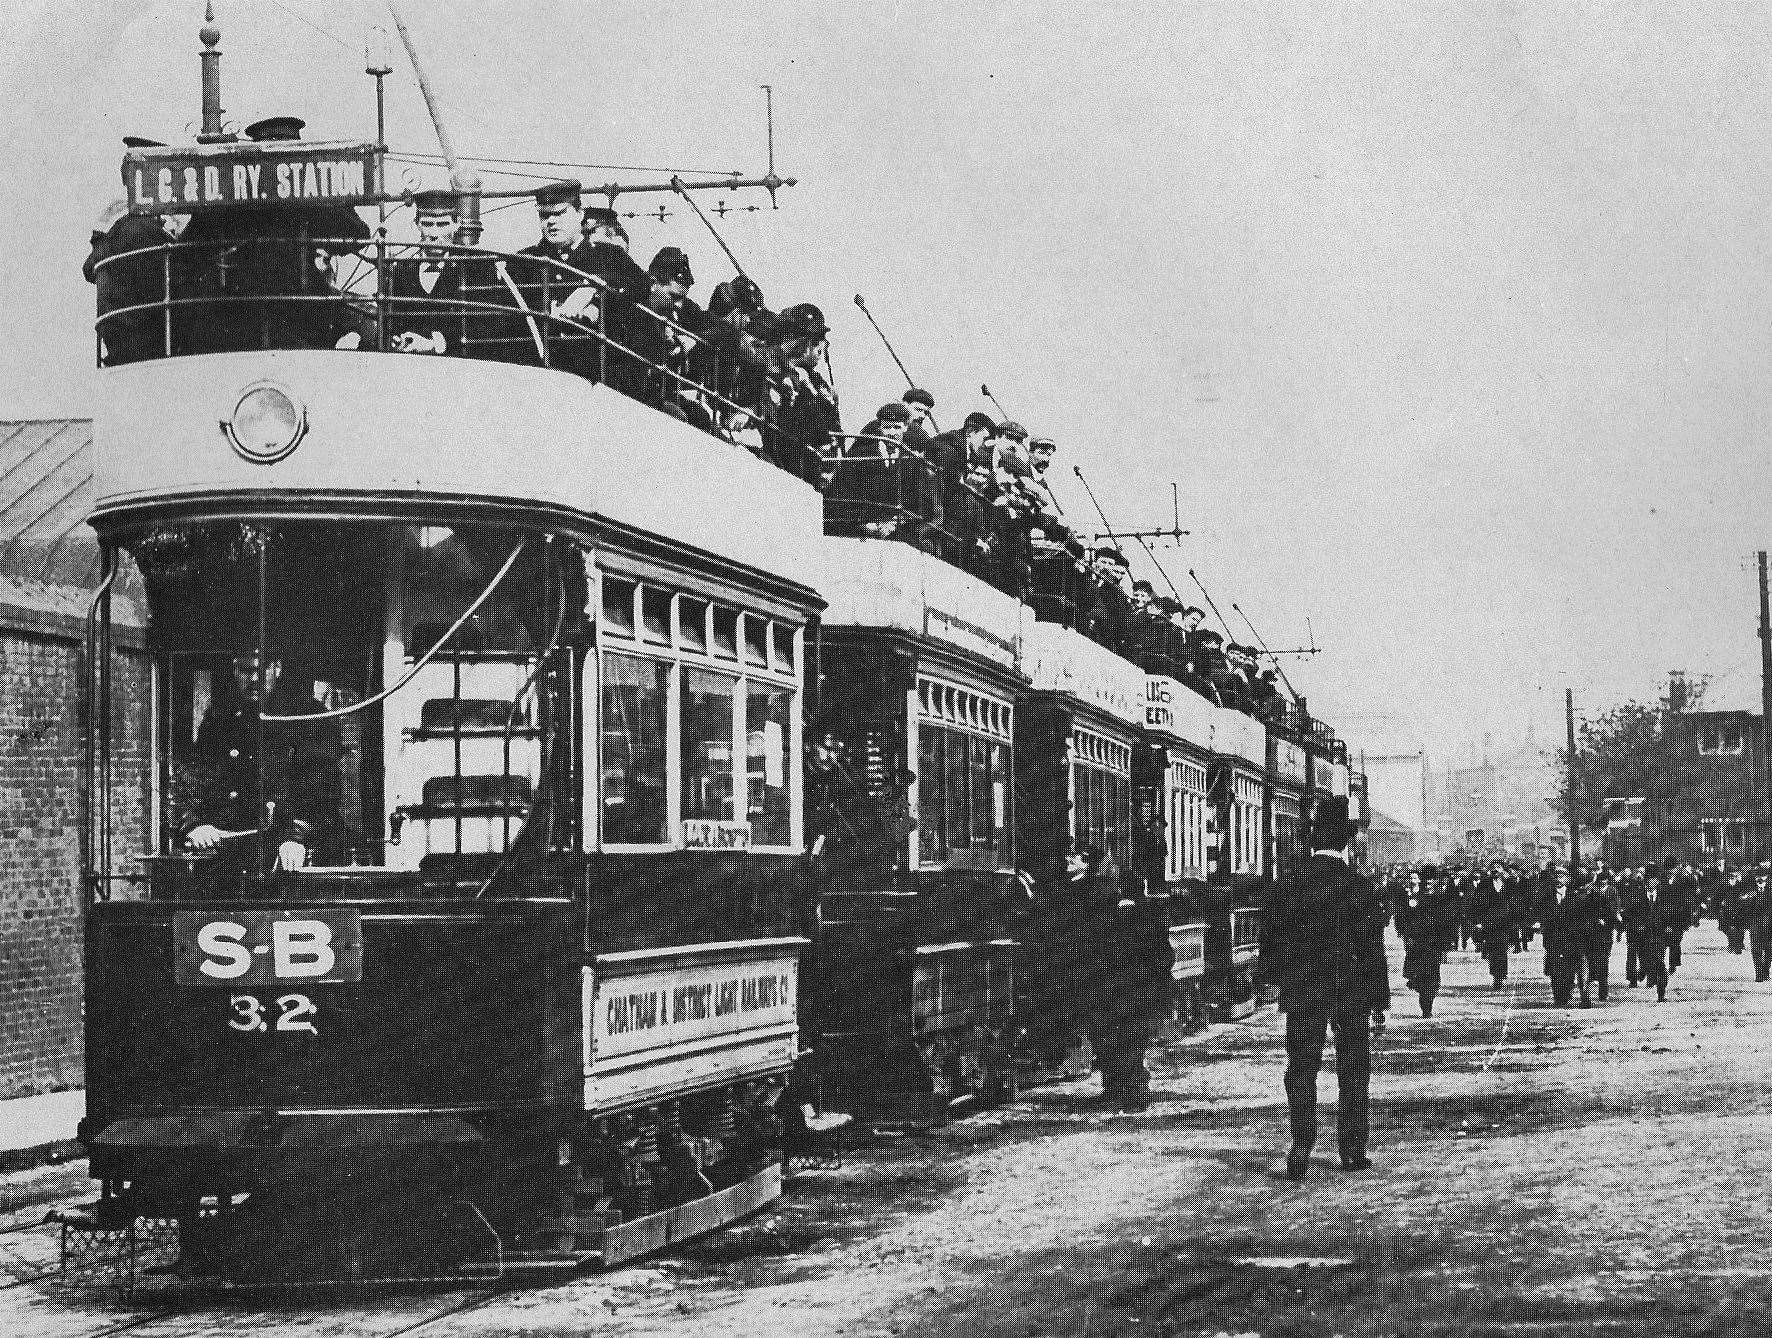 Chatham trams outside the dockyard loaded with workers and Navy personnel